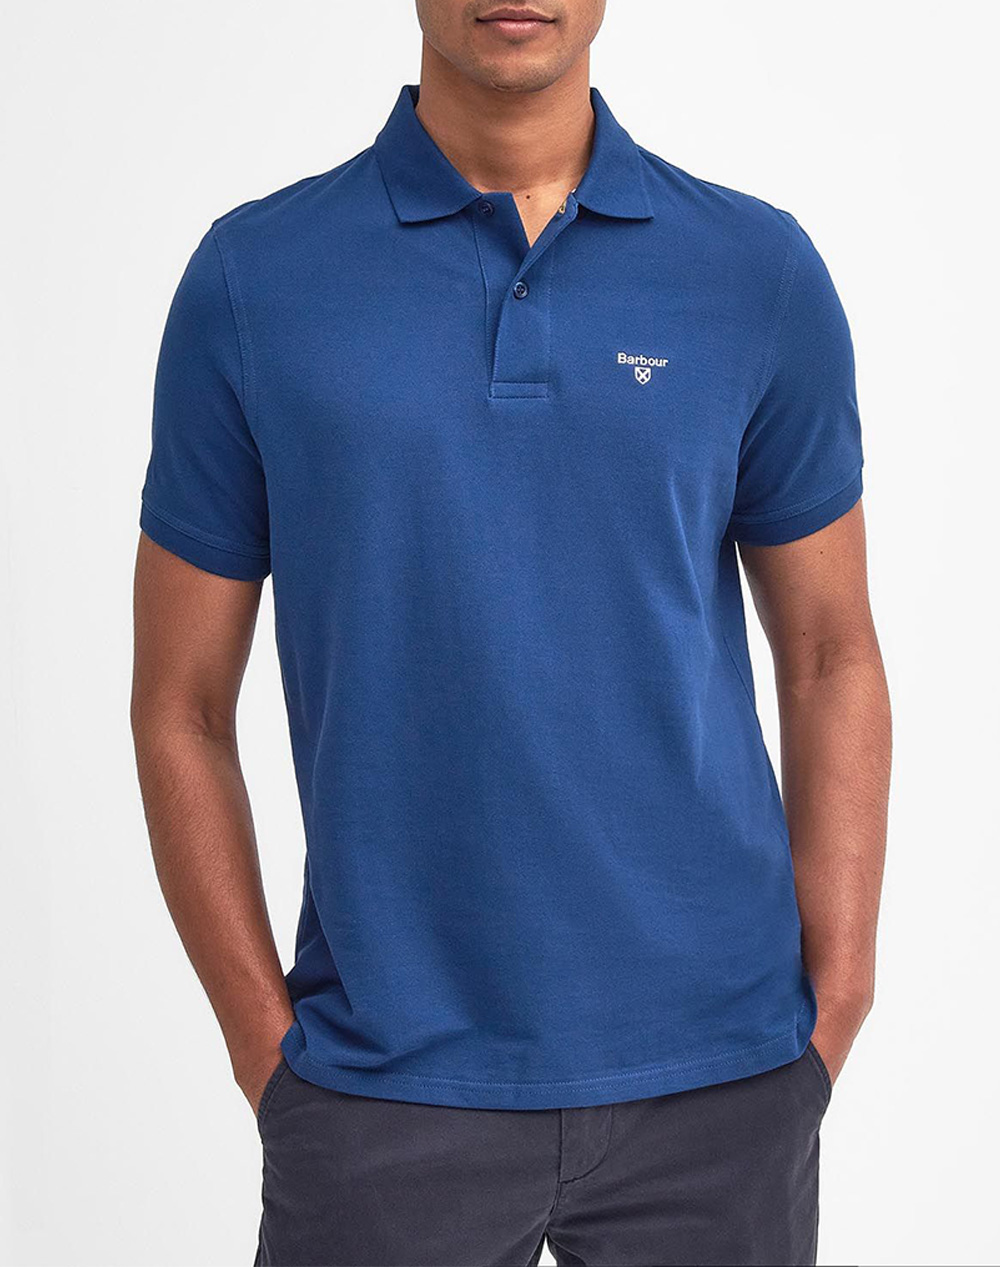 BARBOUR BARBOUR LIGHTWEIGHT SPORTS POLO ΜΠΛΟΥΖΑ POLO MML1367-BRBL91 Blue 3820ABARB3410029_XR13018